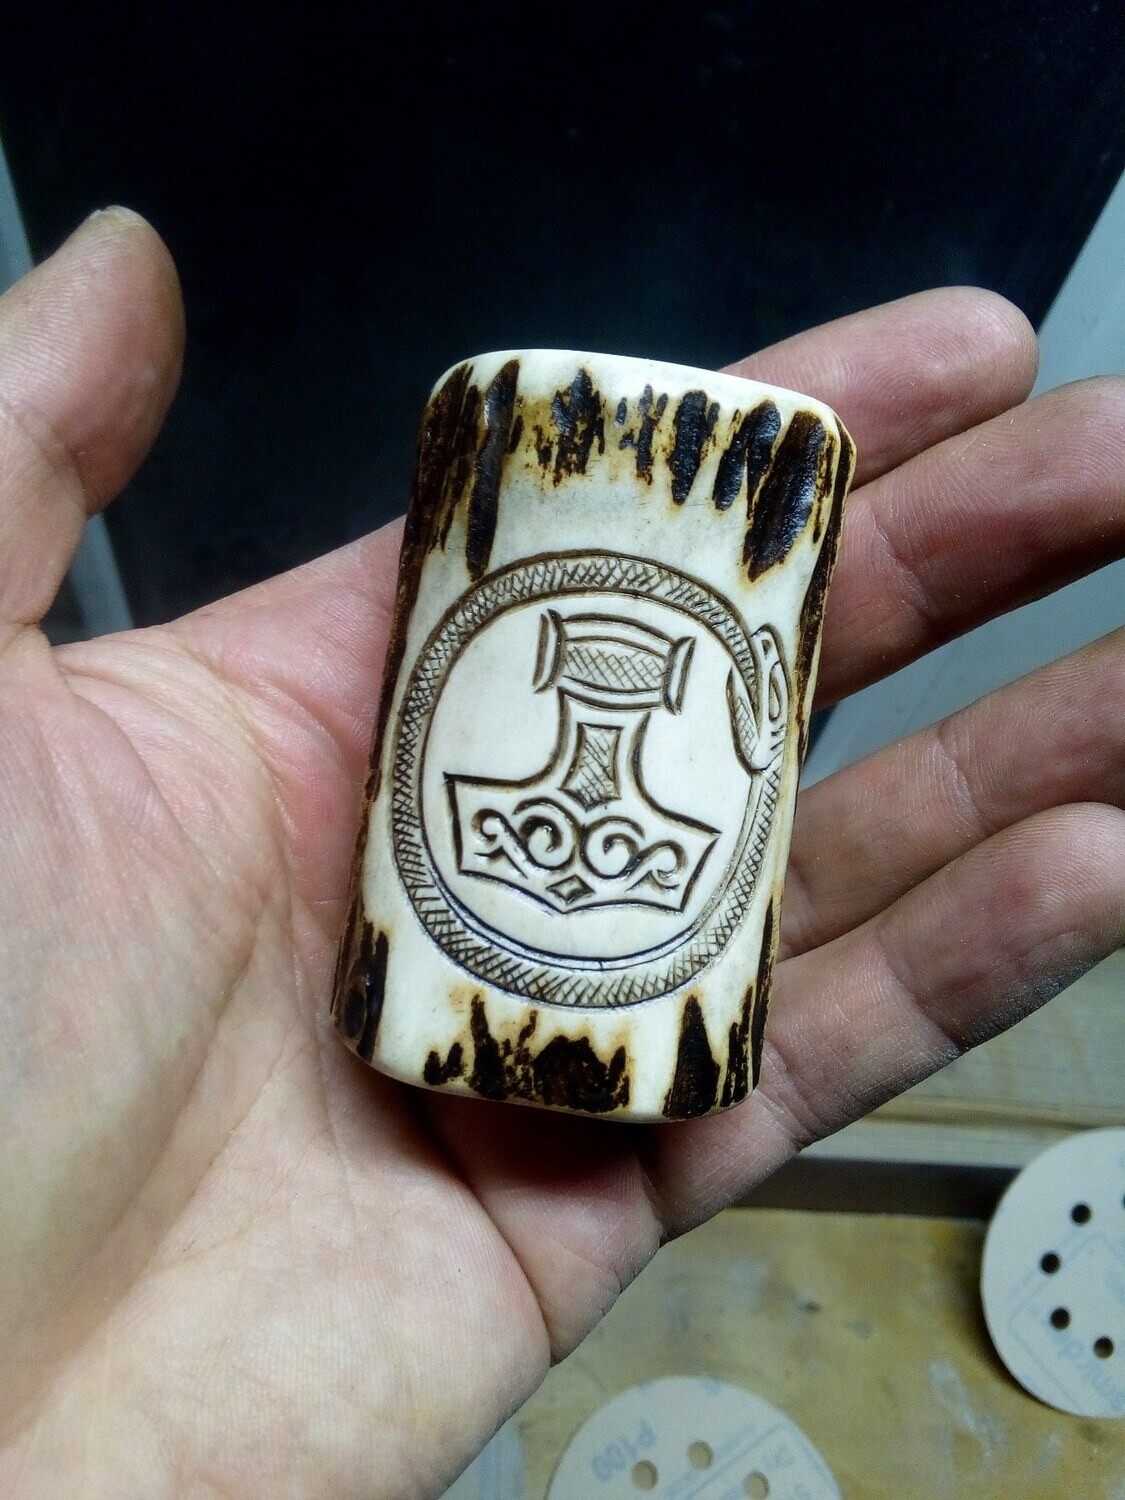 Shot Glass with Mjolnir, Antlers Hand-Carved